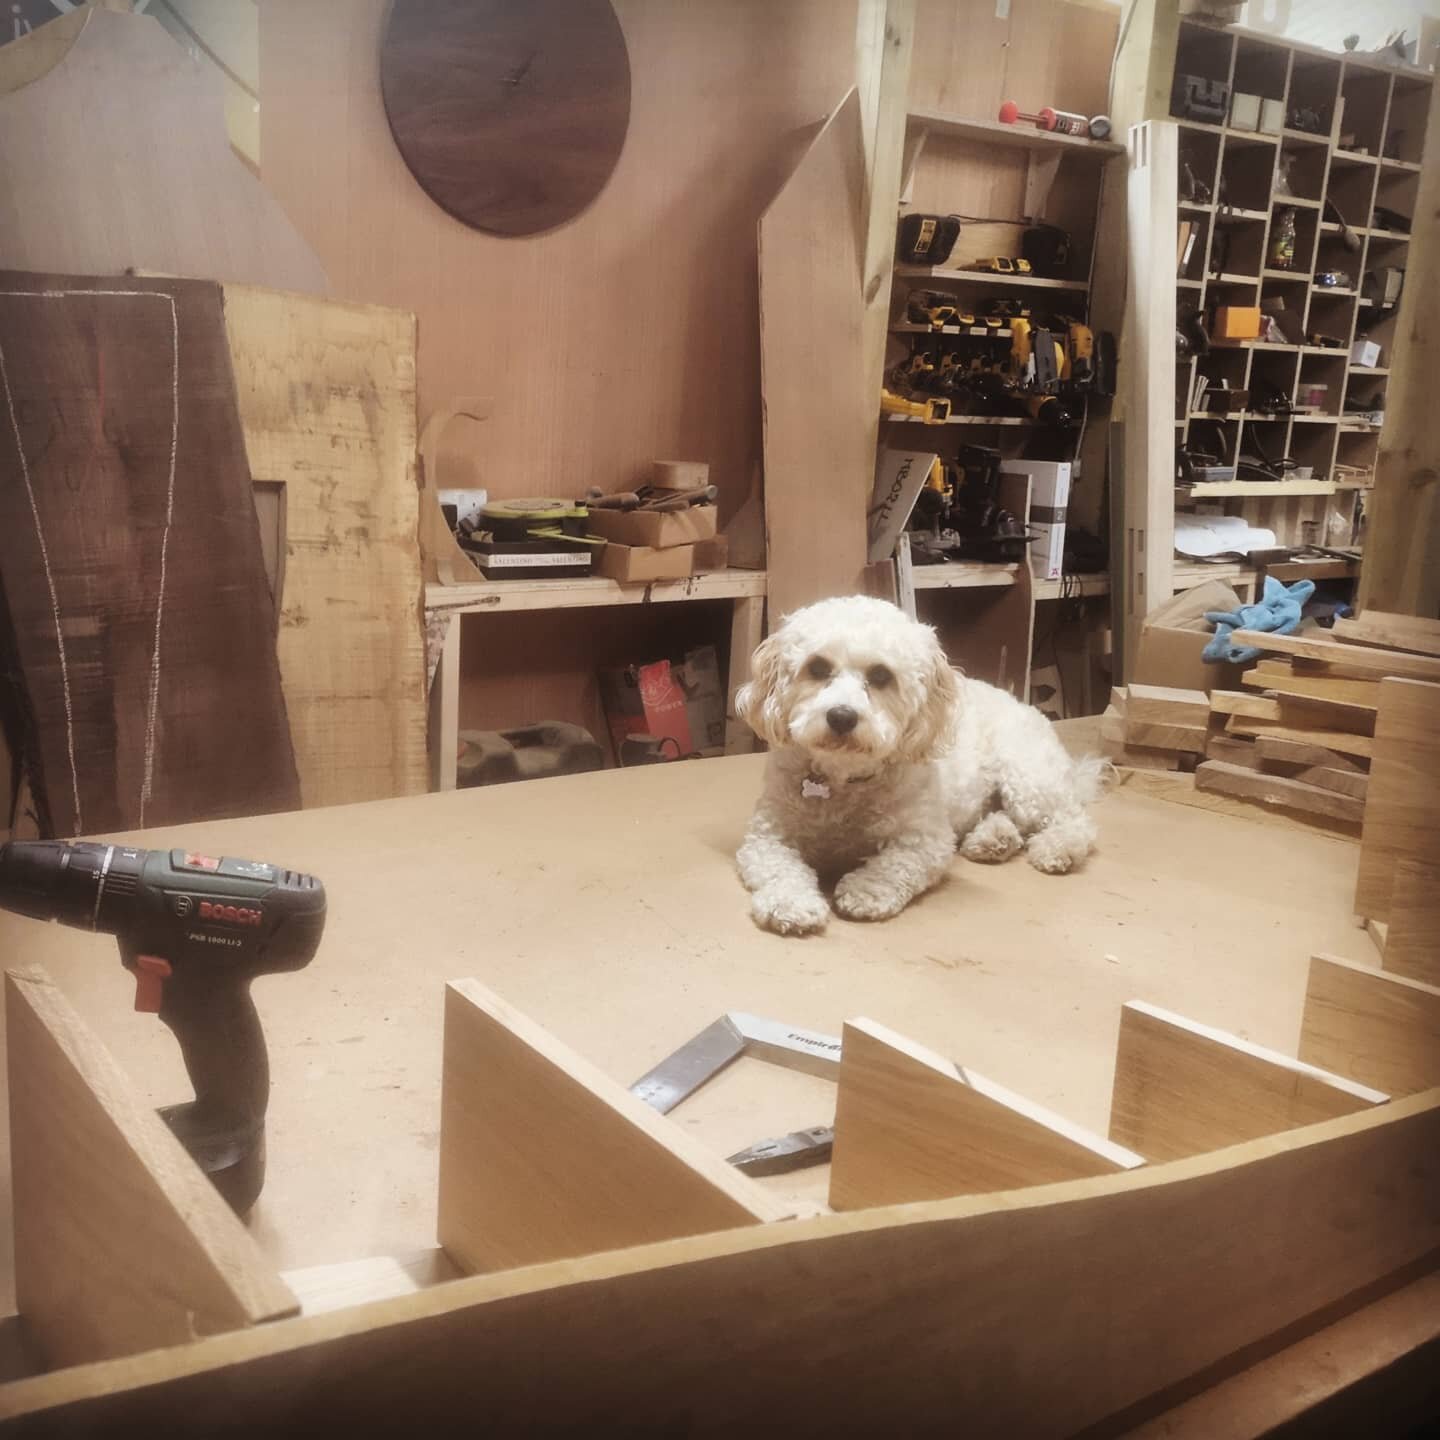 Back in the workshop after a bit of time off. Lola wants to sit watching me on the work bench rather than be in her nice bed 🙄🐶 Getting back into it 🪚
#workshopdog #notsohelpfuldog #designermaker #furnituredesign
.
.
.
.
.
. 
#dogatwork #dogsofins